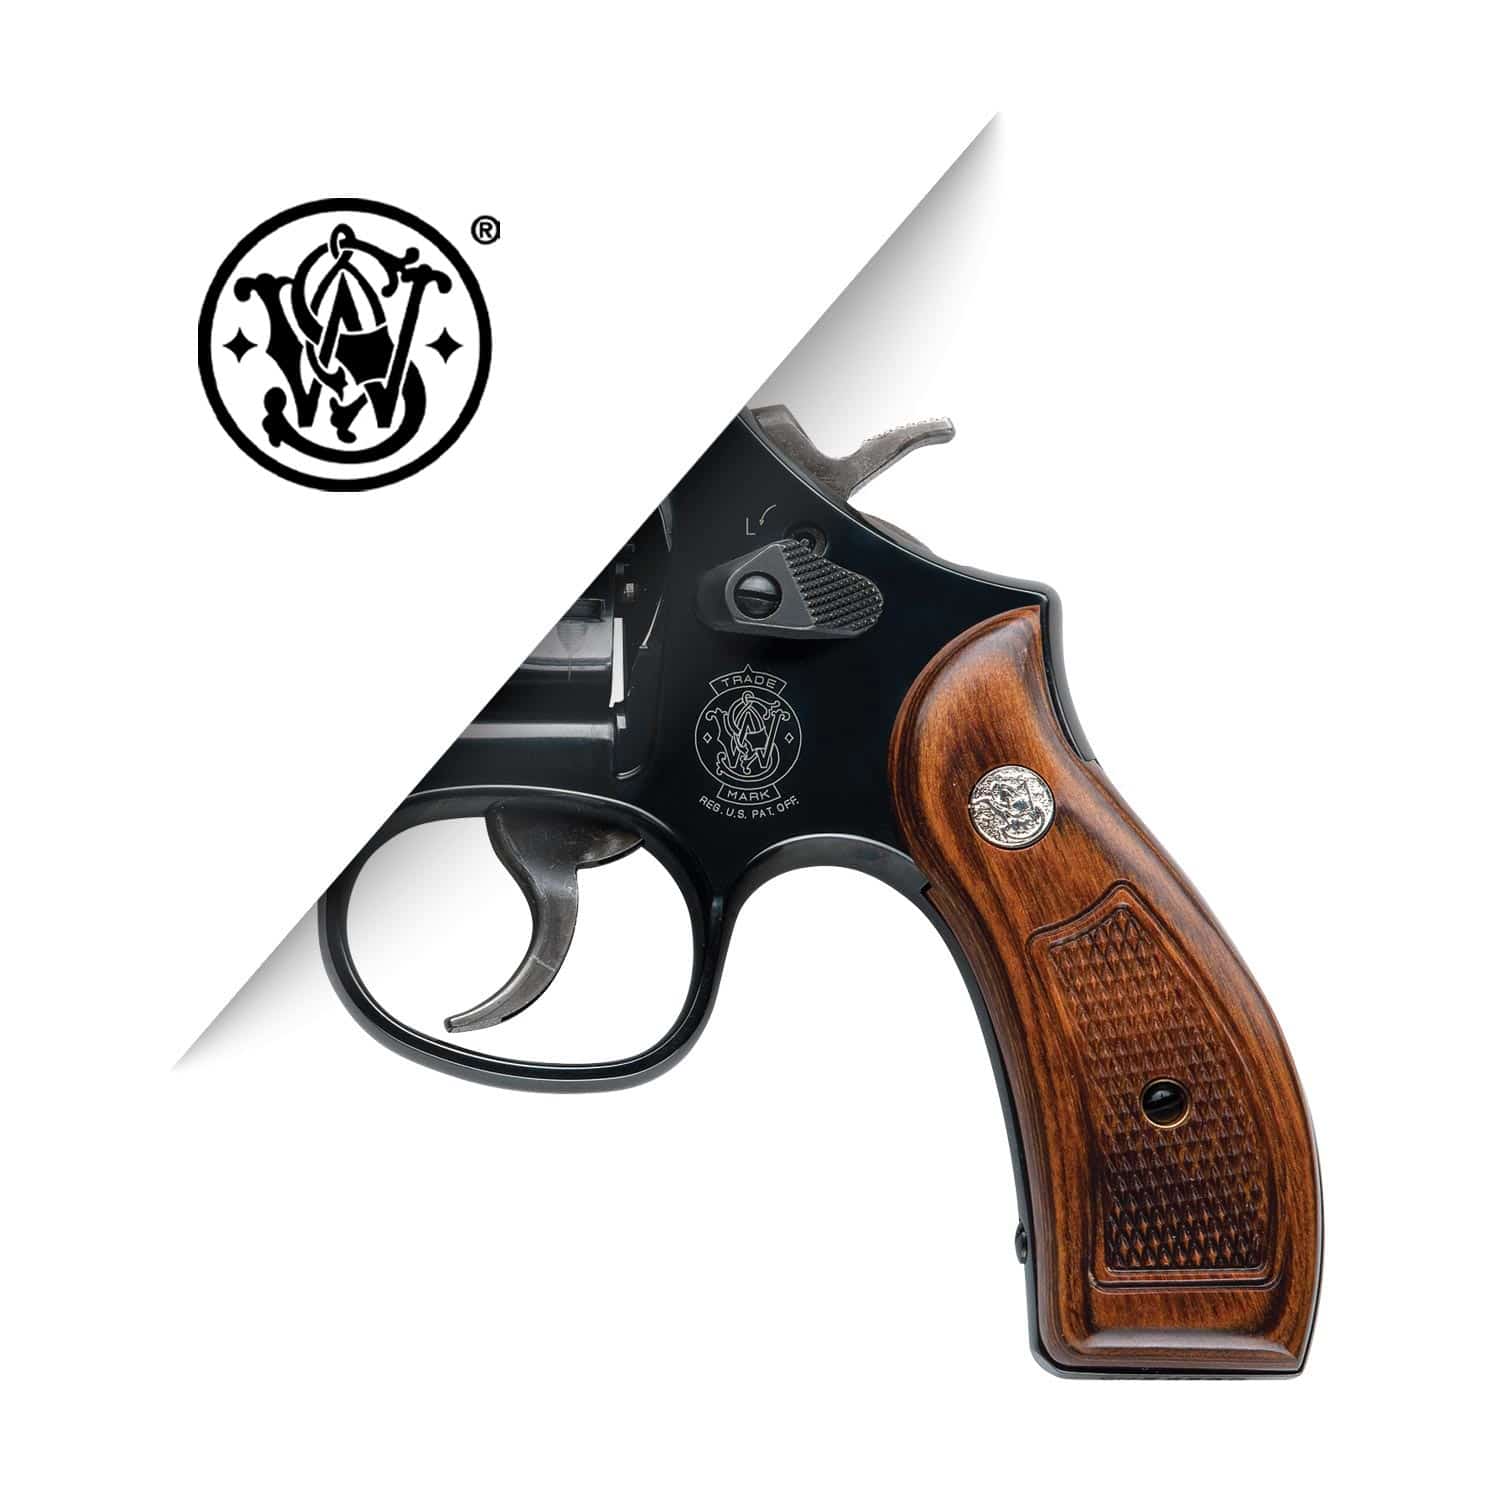 Wesson smith revolver and grips Smith &